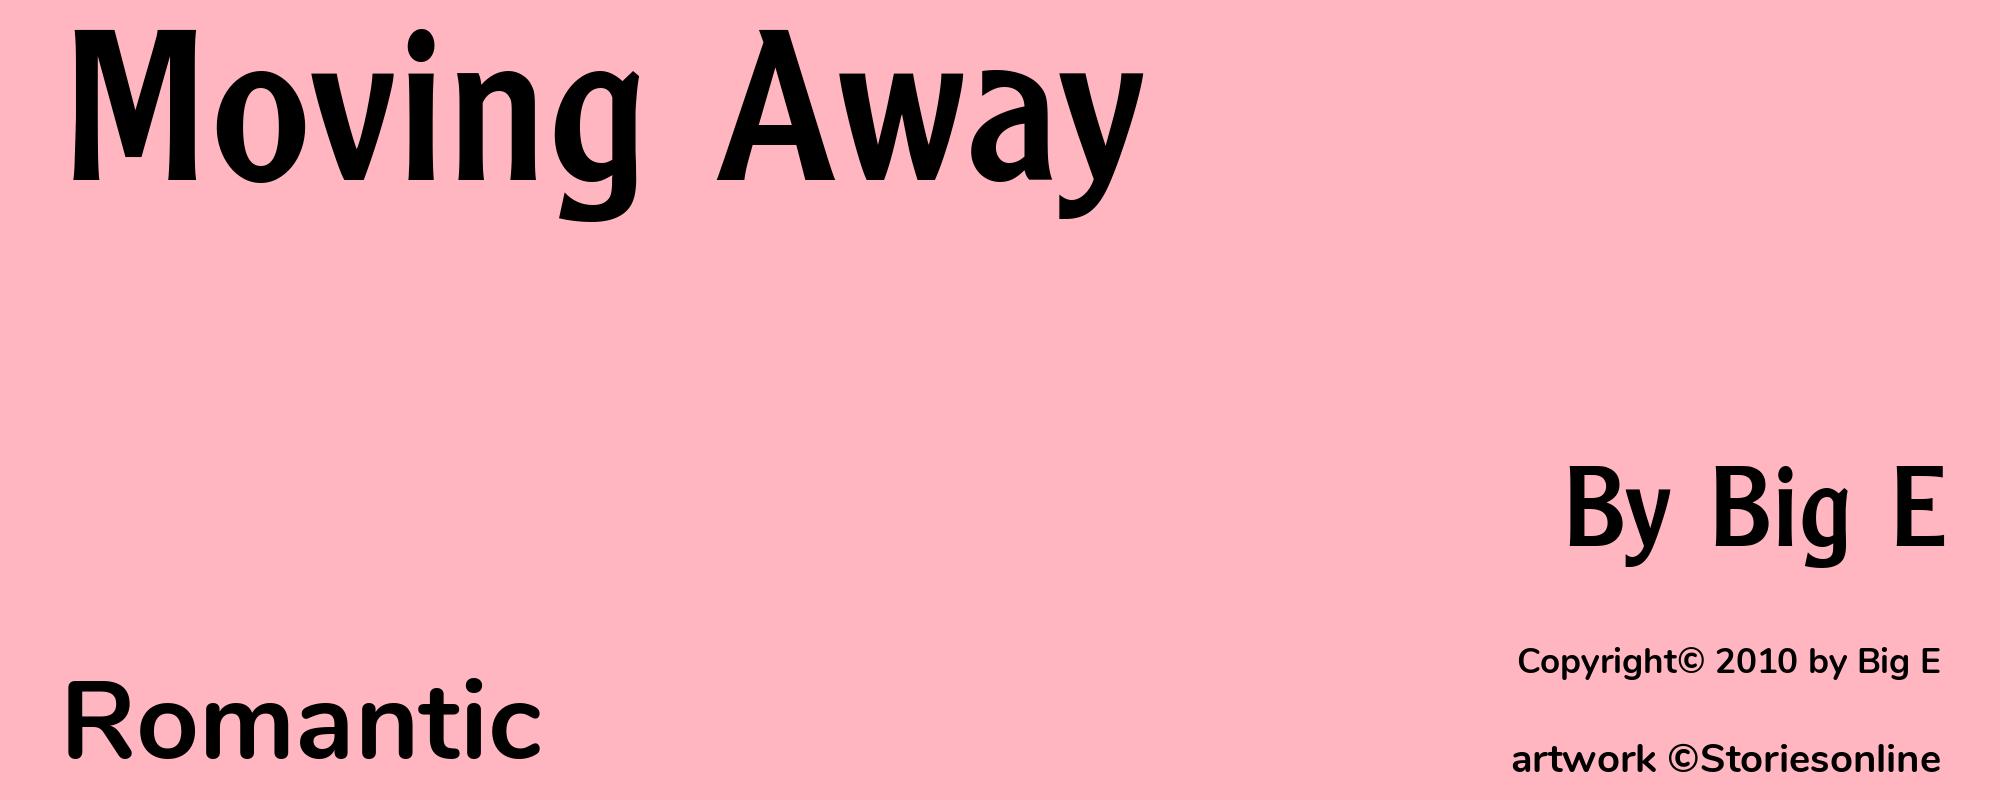 Moving Away - Cover